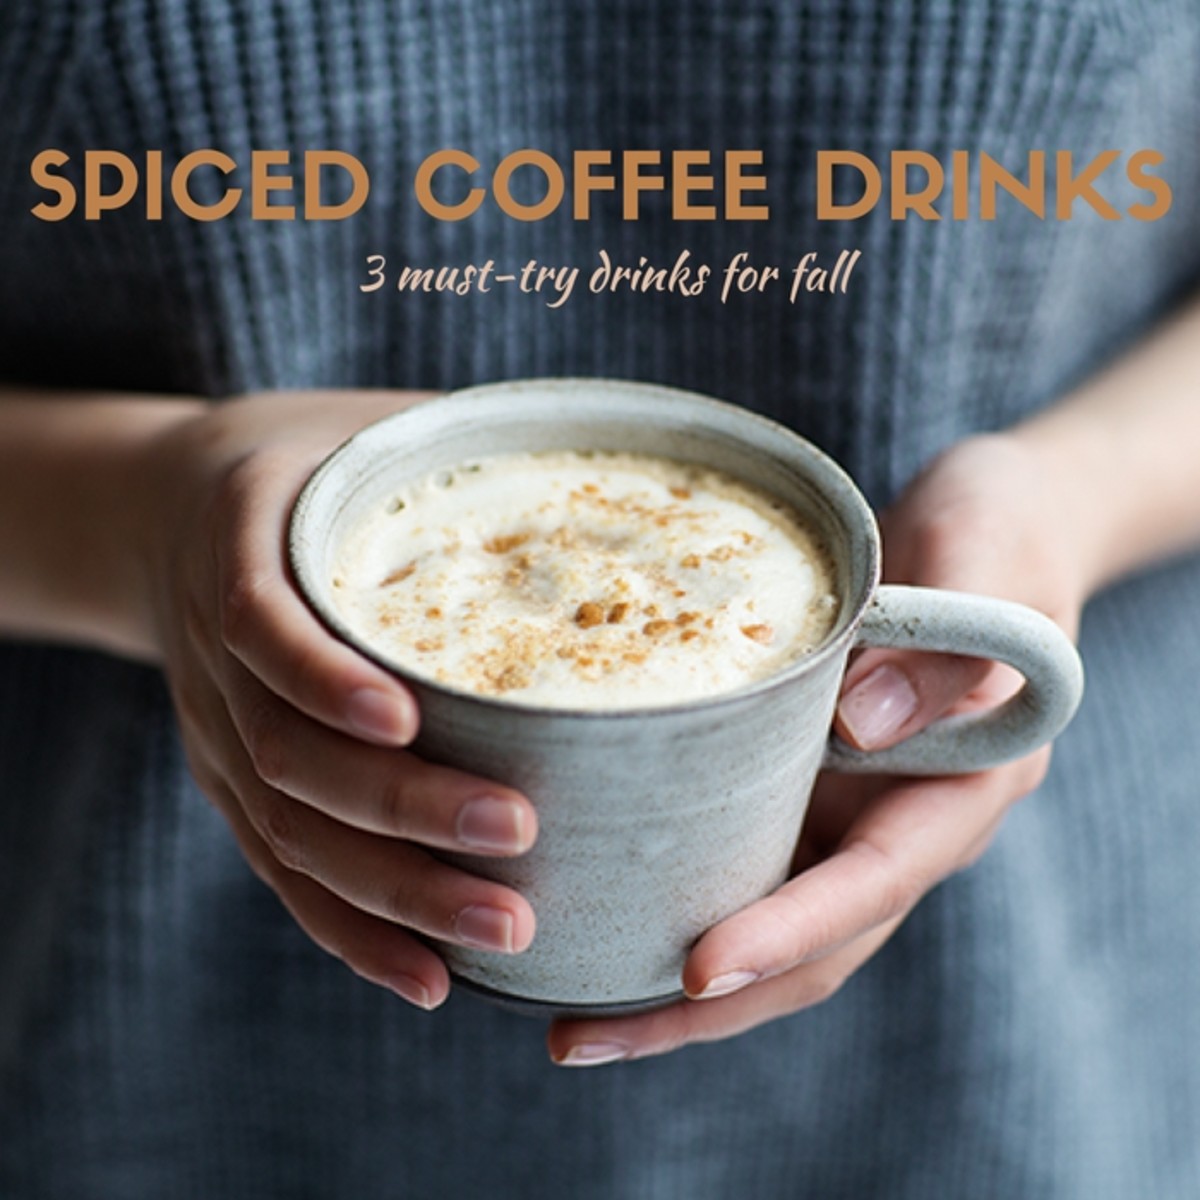 Spiced Coffee Drinks for Fall